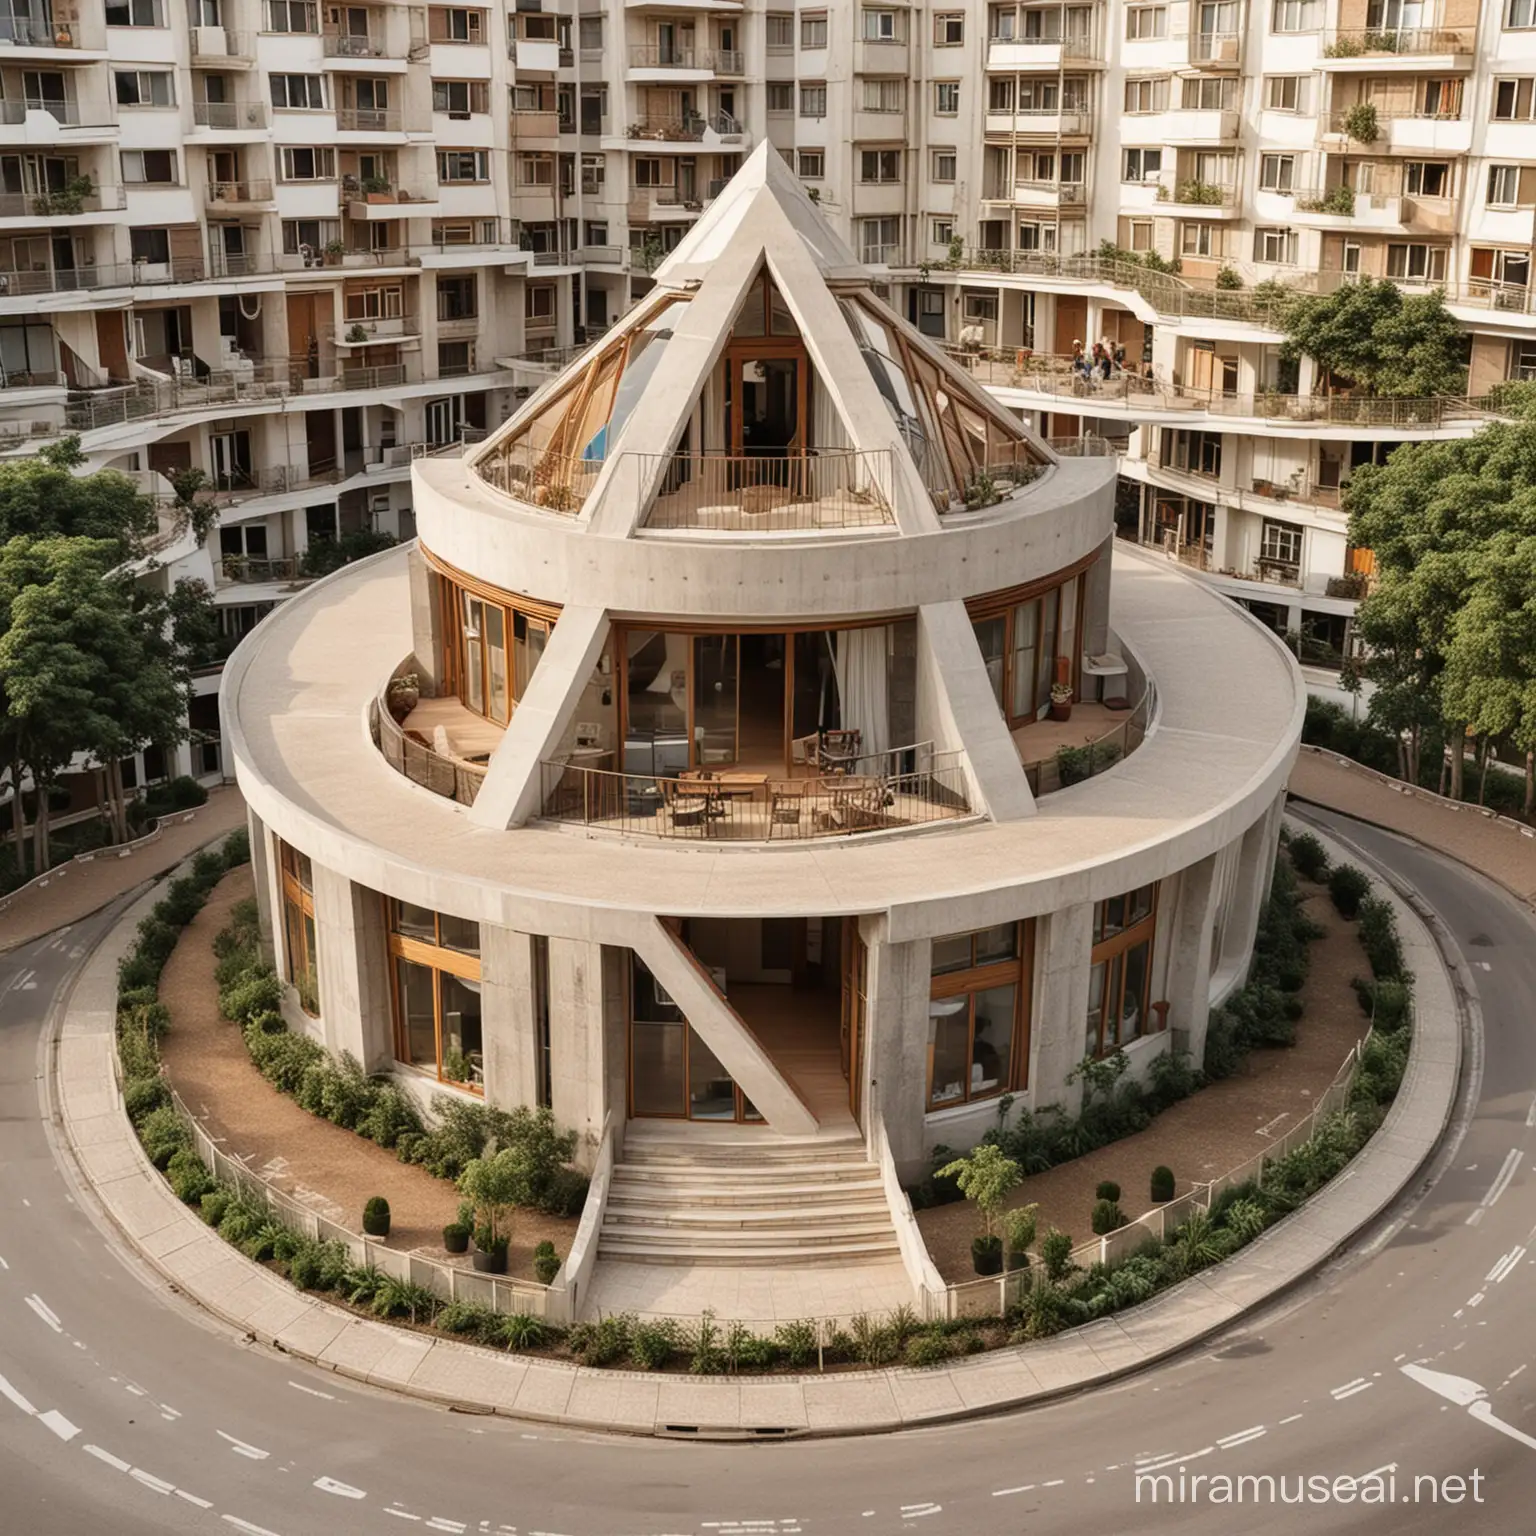 Creative Architecture TriangleTopped Building with Balcony and Circular Ground Floor